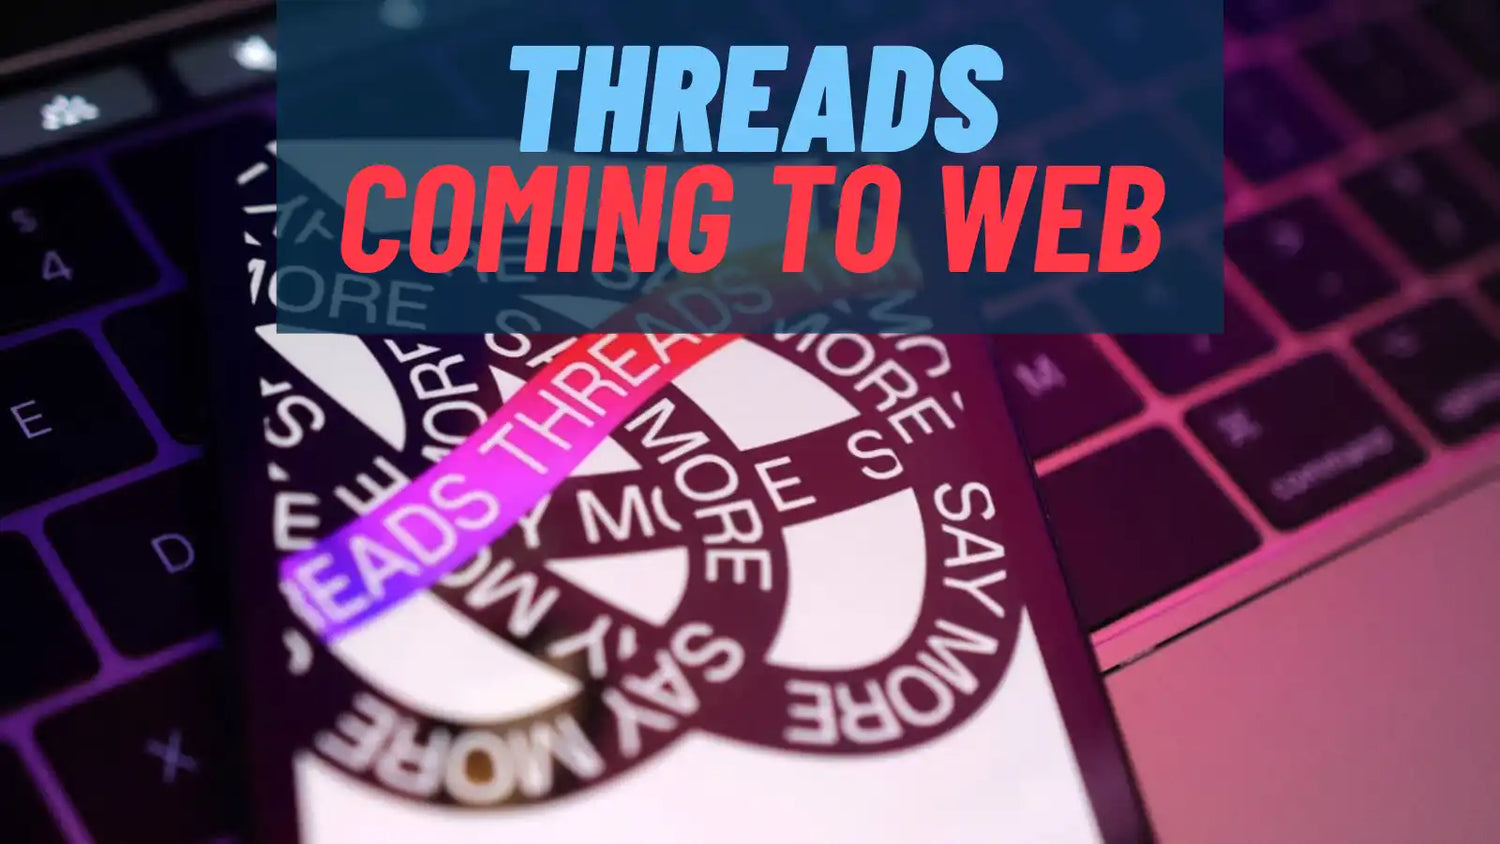 Zuck Confirms Threads for Web Coming This Week